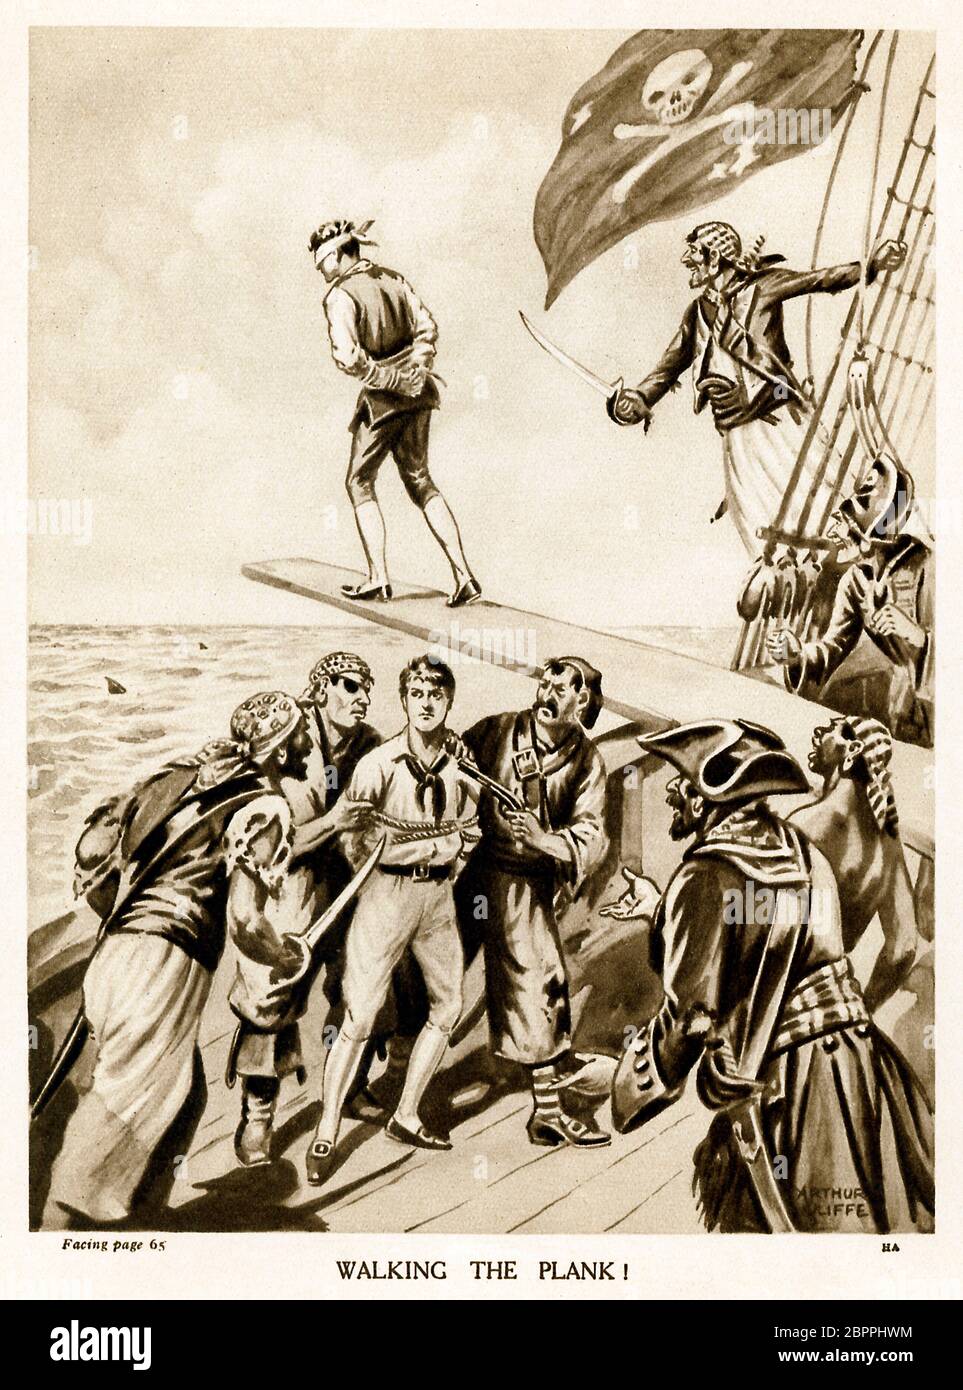 Walking The Plank, boys annual illustration of an adventure on the Spanish Main with Pirates forcing the heroes into the shark infested sea with the Jolly Roger looking on Stock Photo